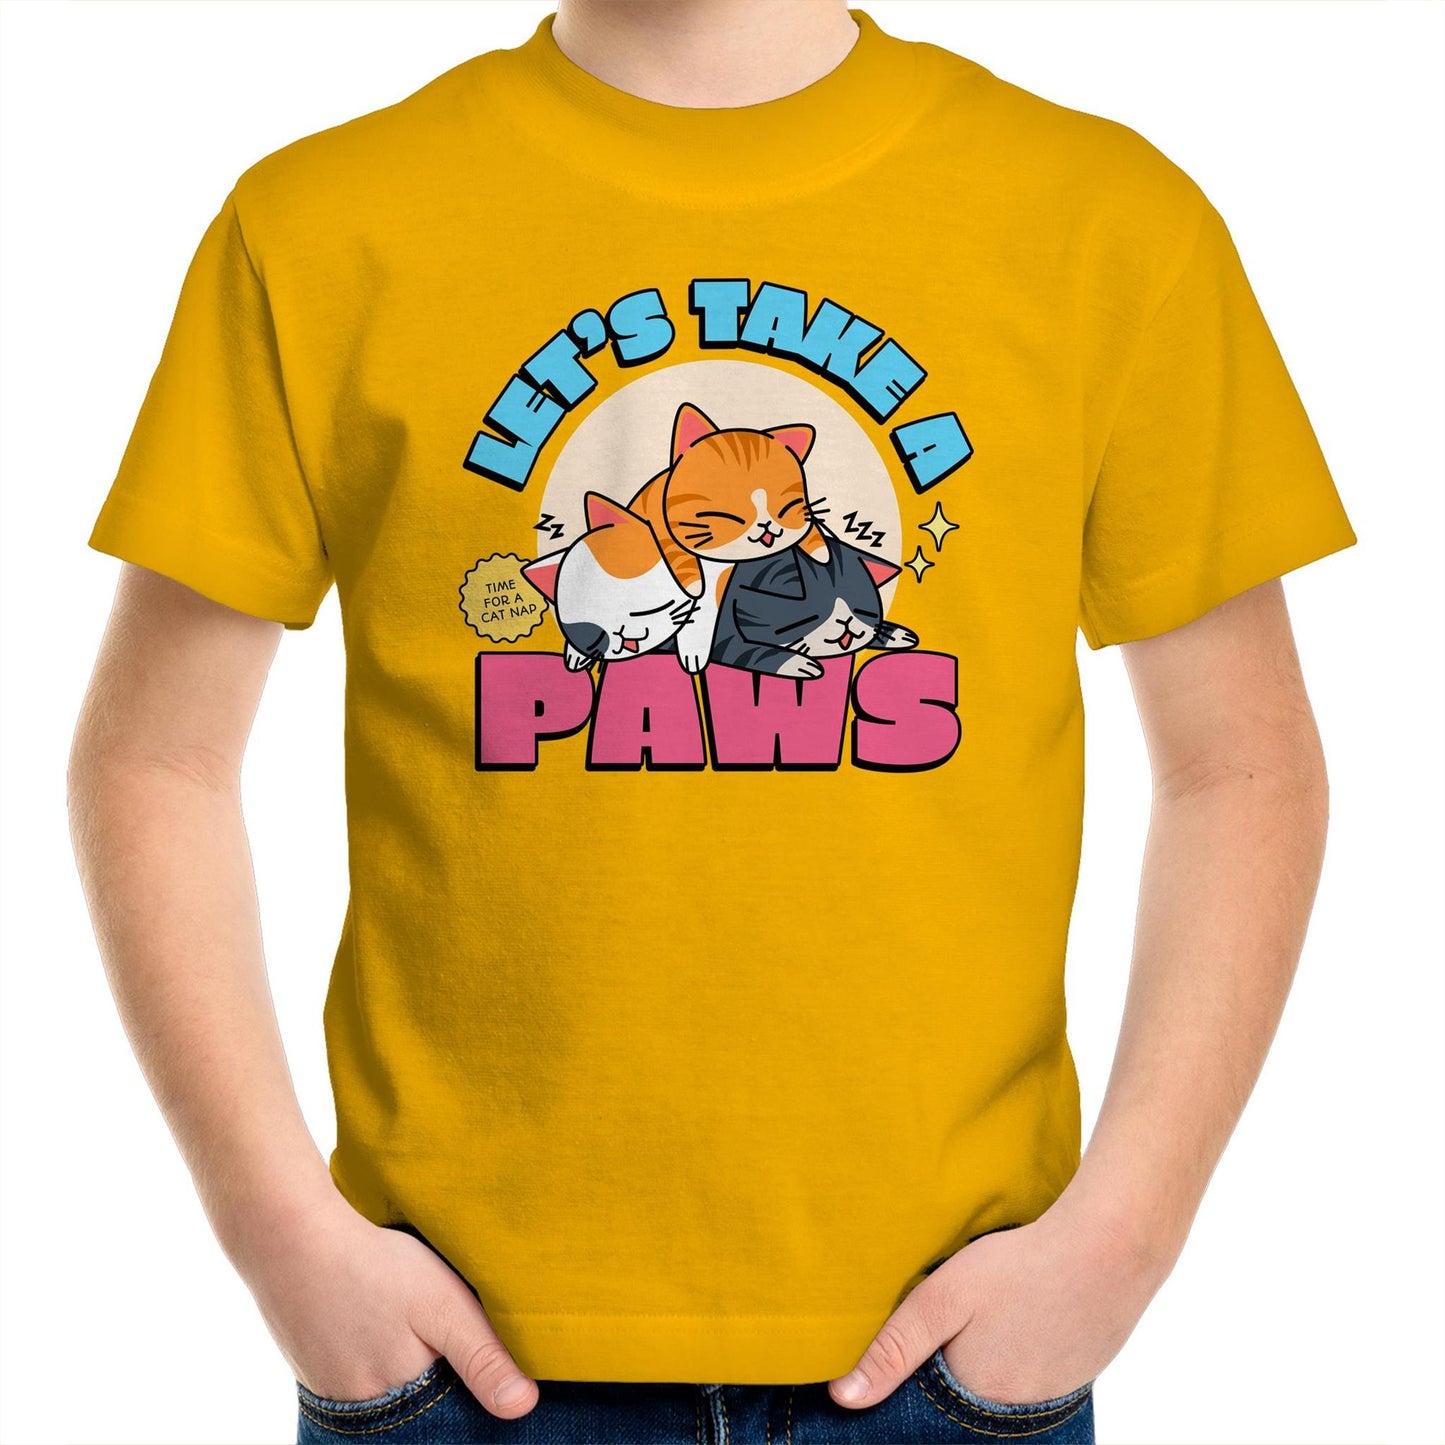 Let's Take A Pause, Time For A Cat Nap - Kids Youth T-Shirt Gold Kids Youth T-shirt animal